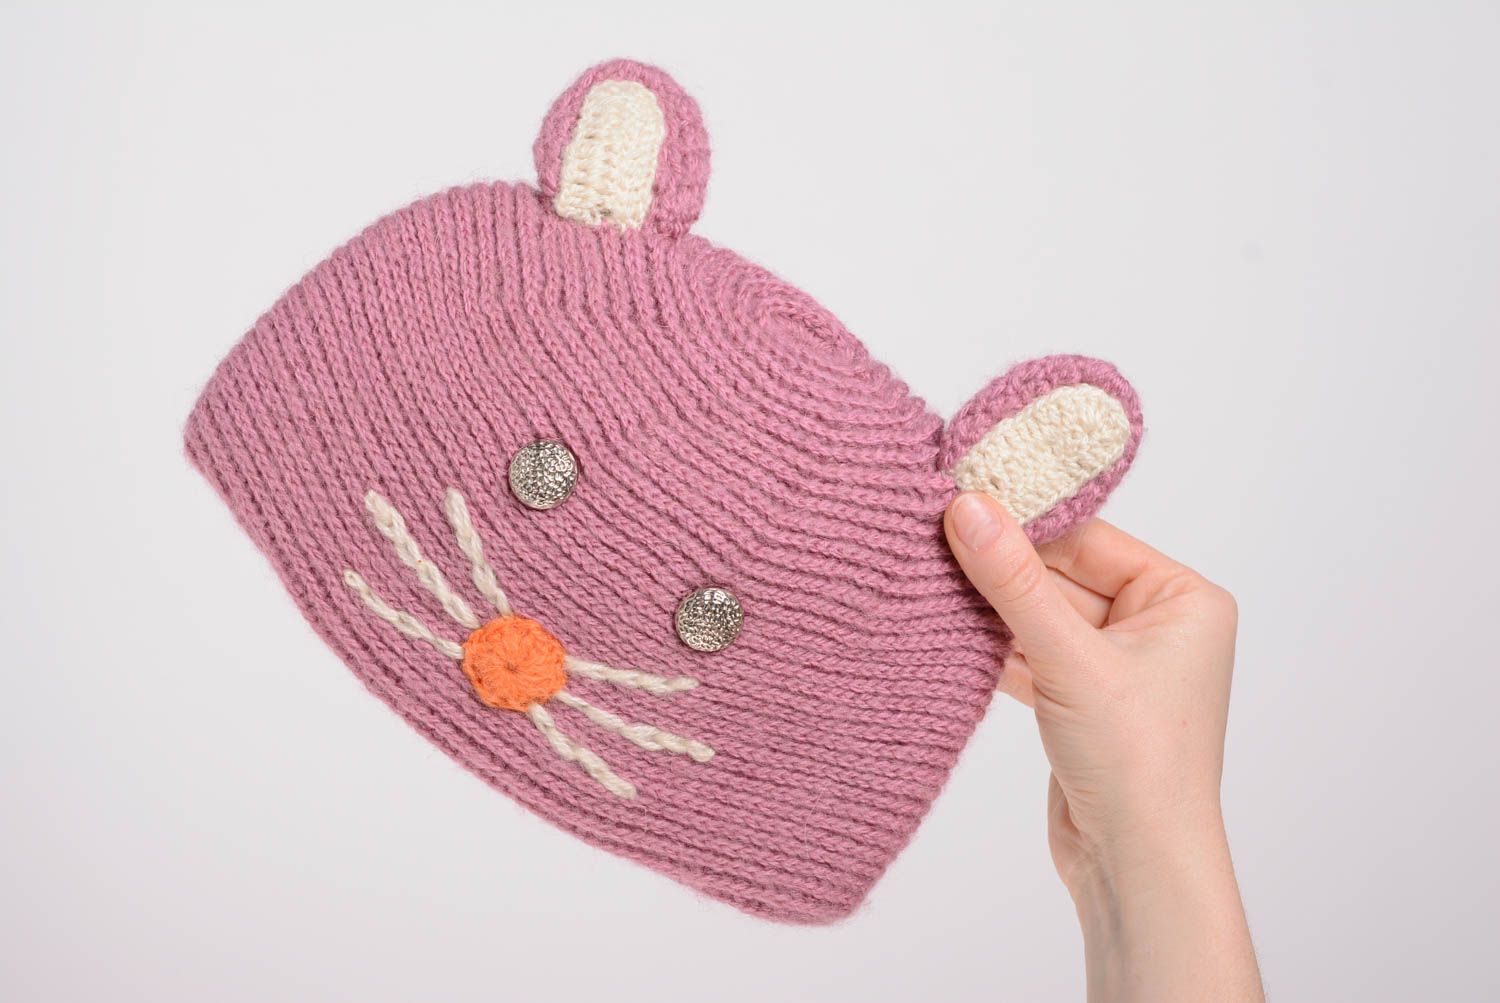 Handmade funny animal hat knitted of pink woolen threads with ears for baby Cat photo 4